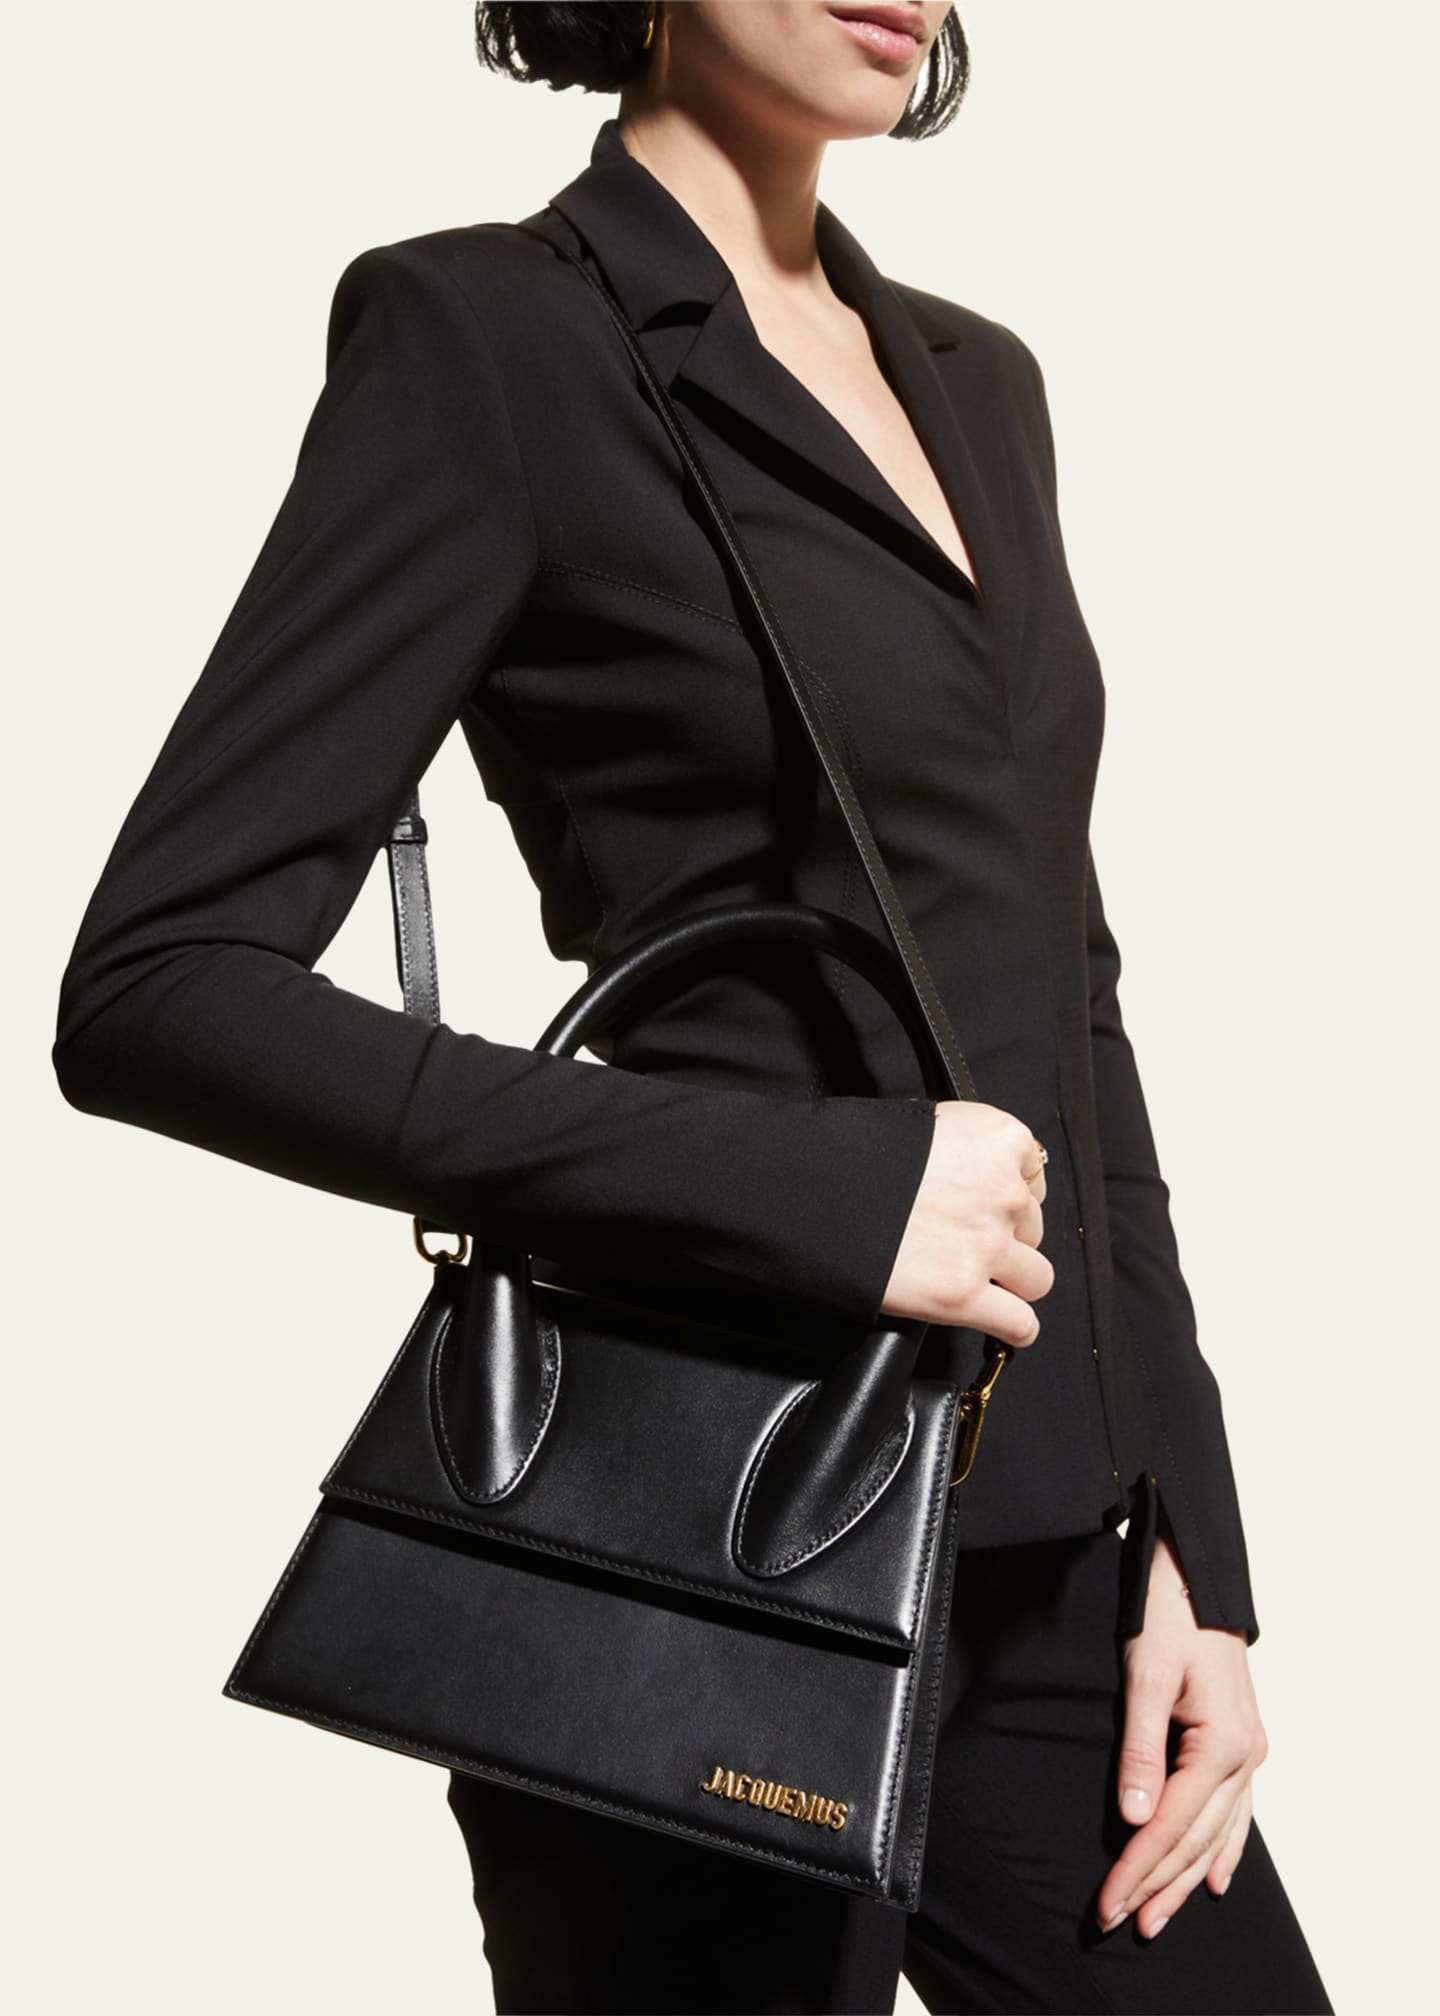 Buy Jacquemus Le Grand Chiquito Bag for Womens